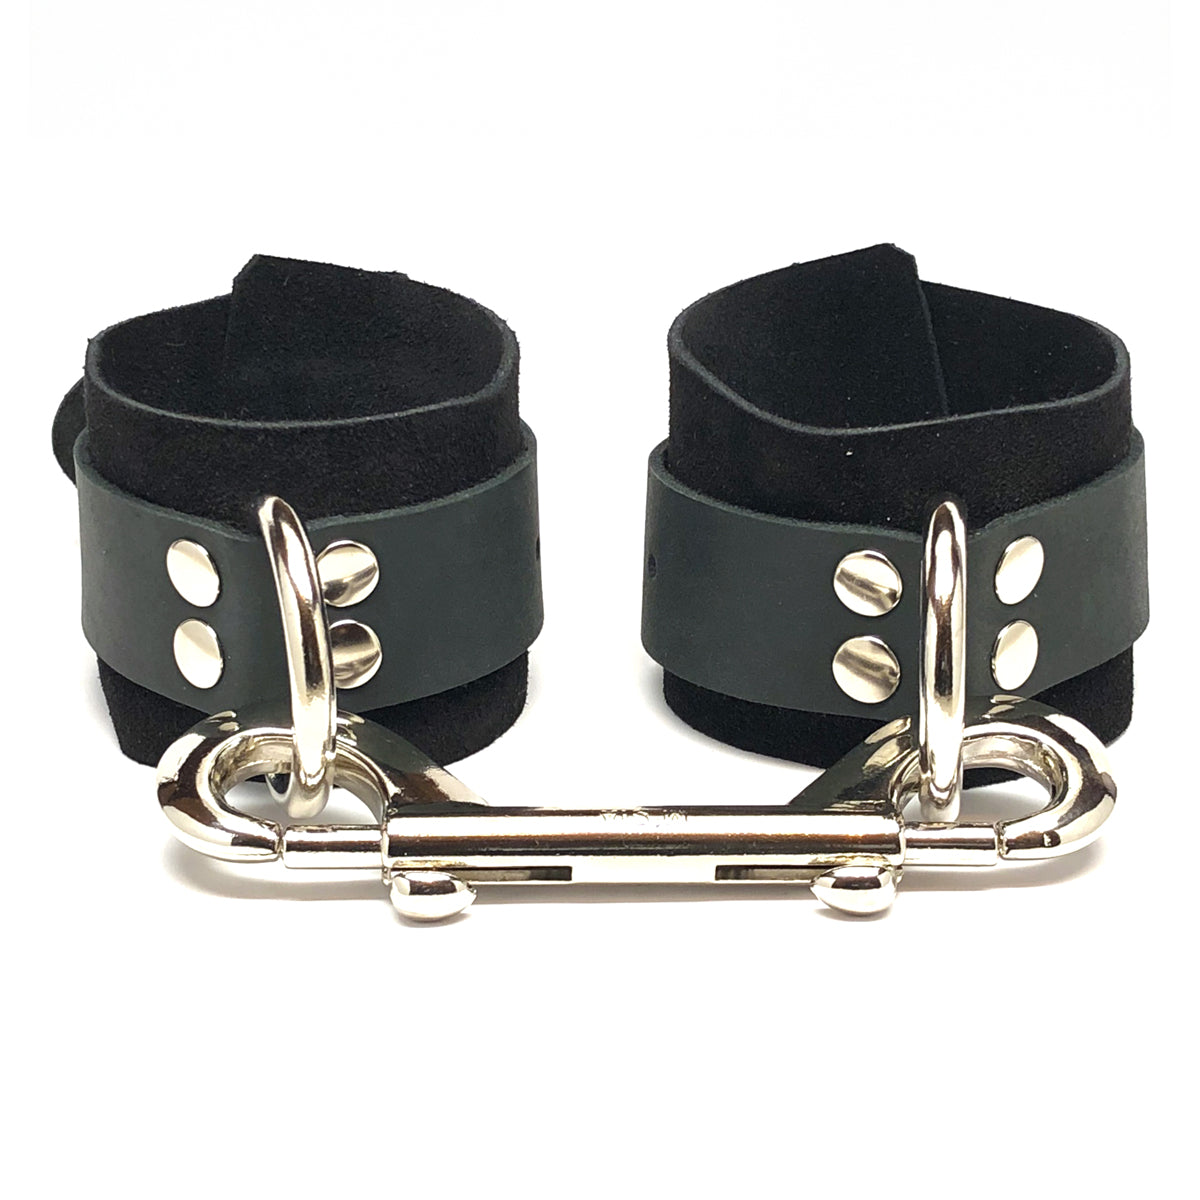 For bondage play that&rsquo;s rough on the outside and soft on the inside, nothing works better than these handmade, suede-lined, leather wrist & ankle cuffs.